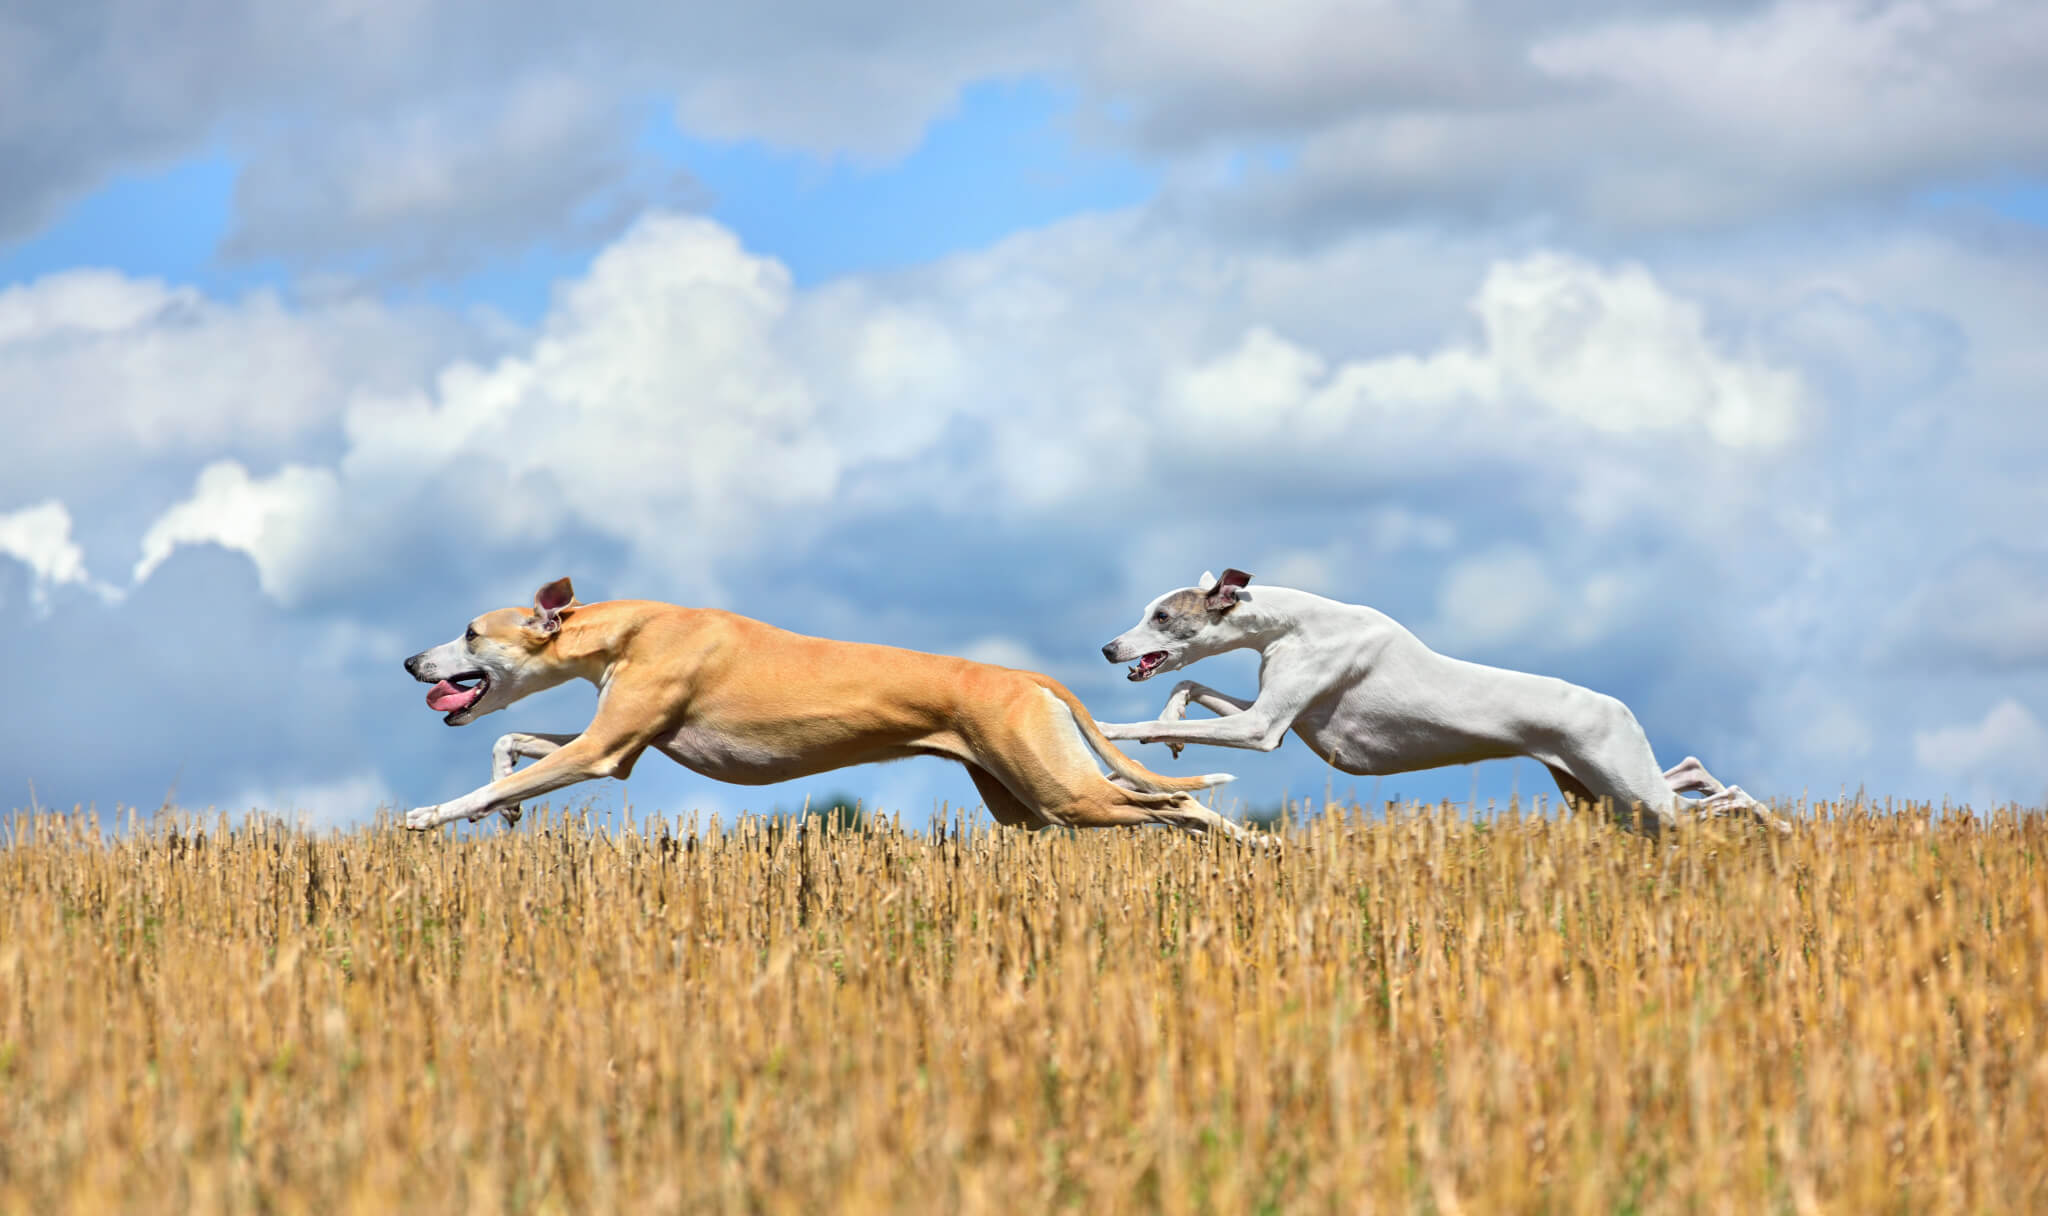 Two Greyhounds running